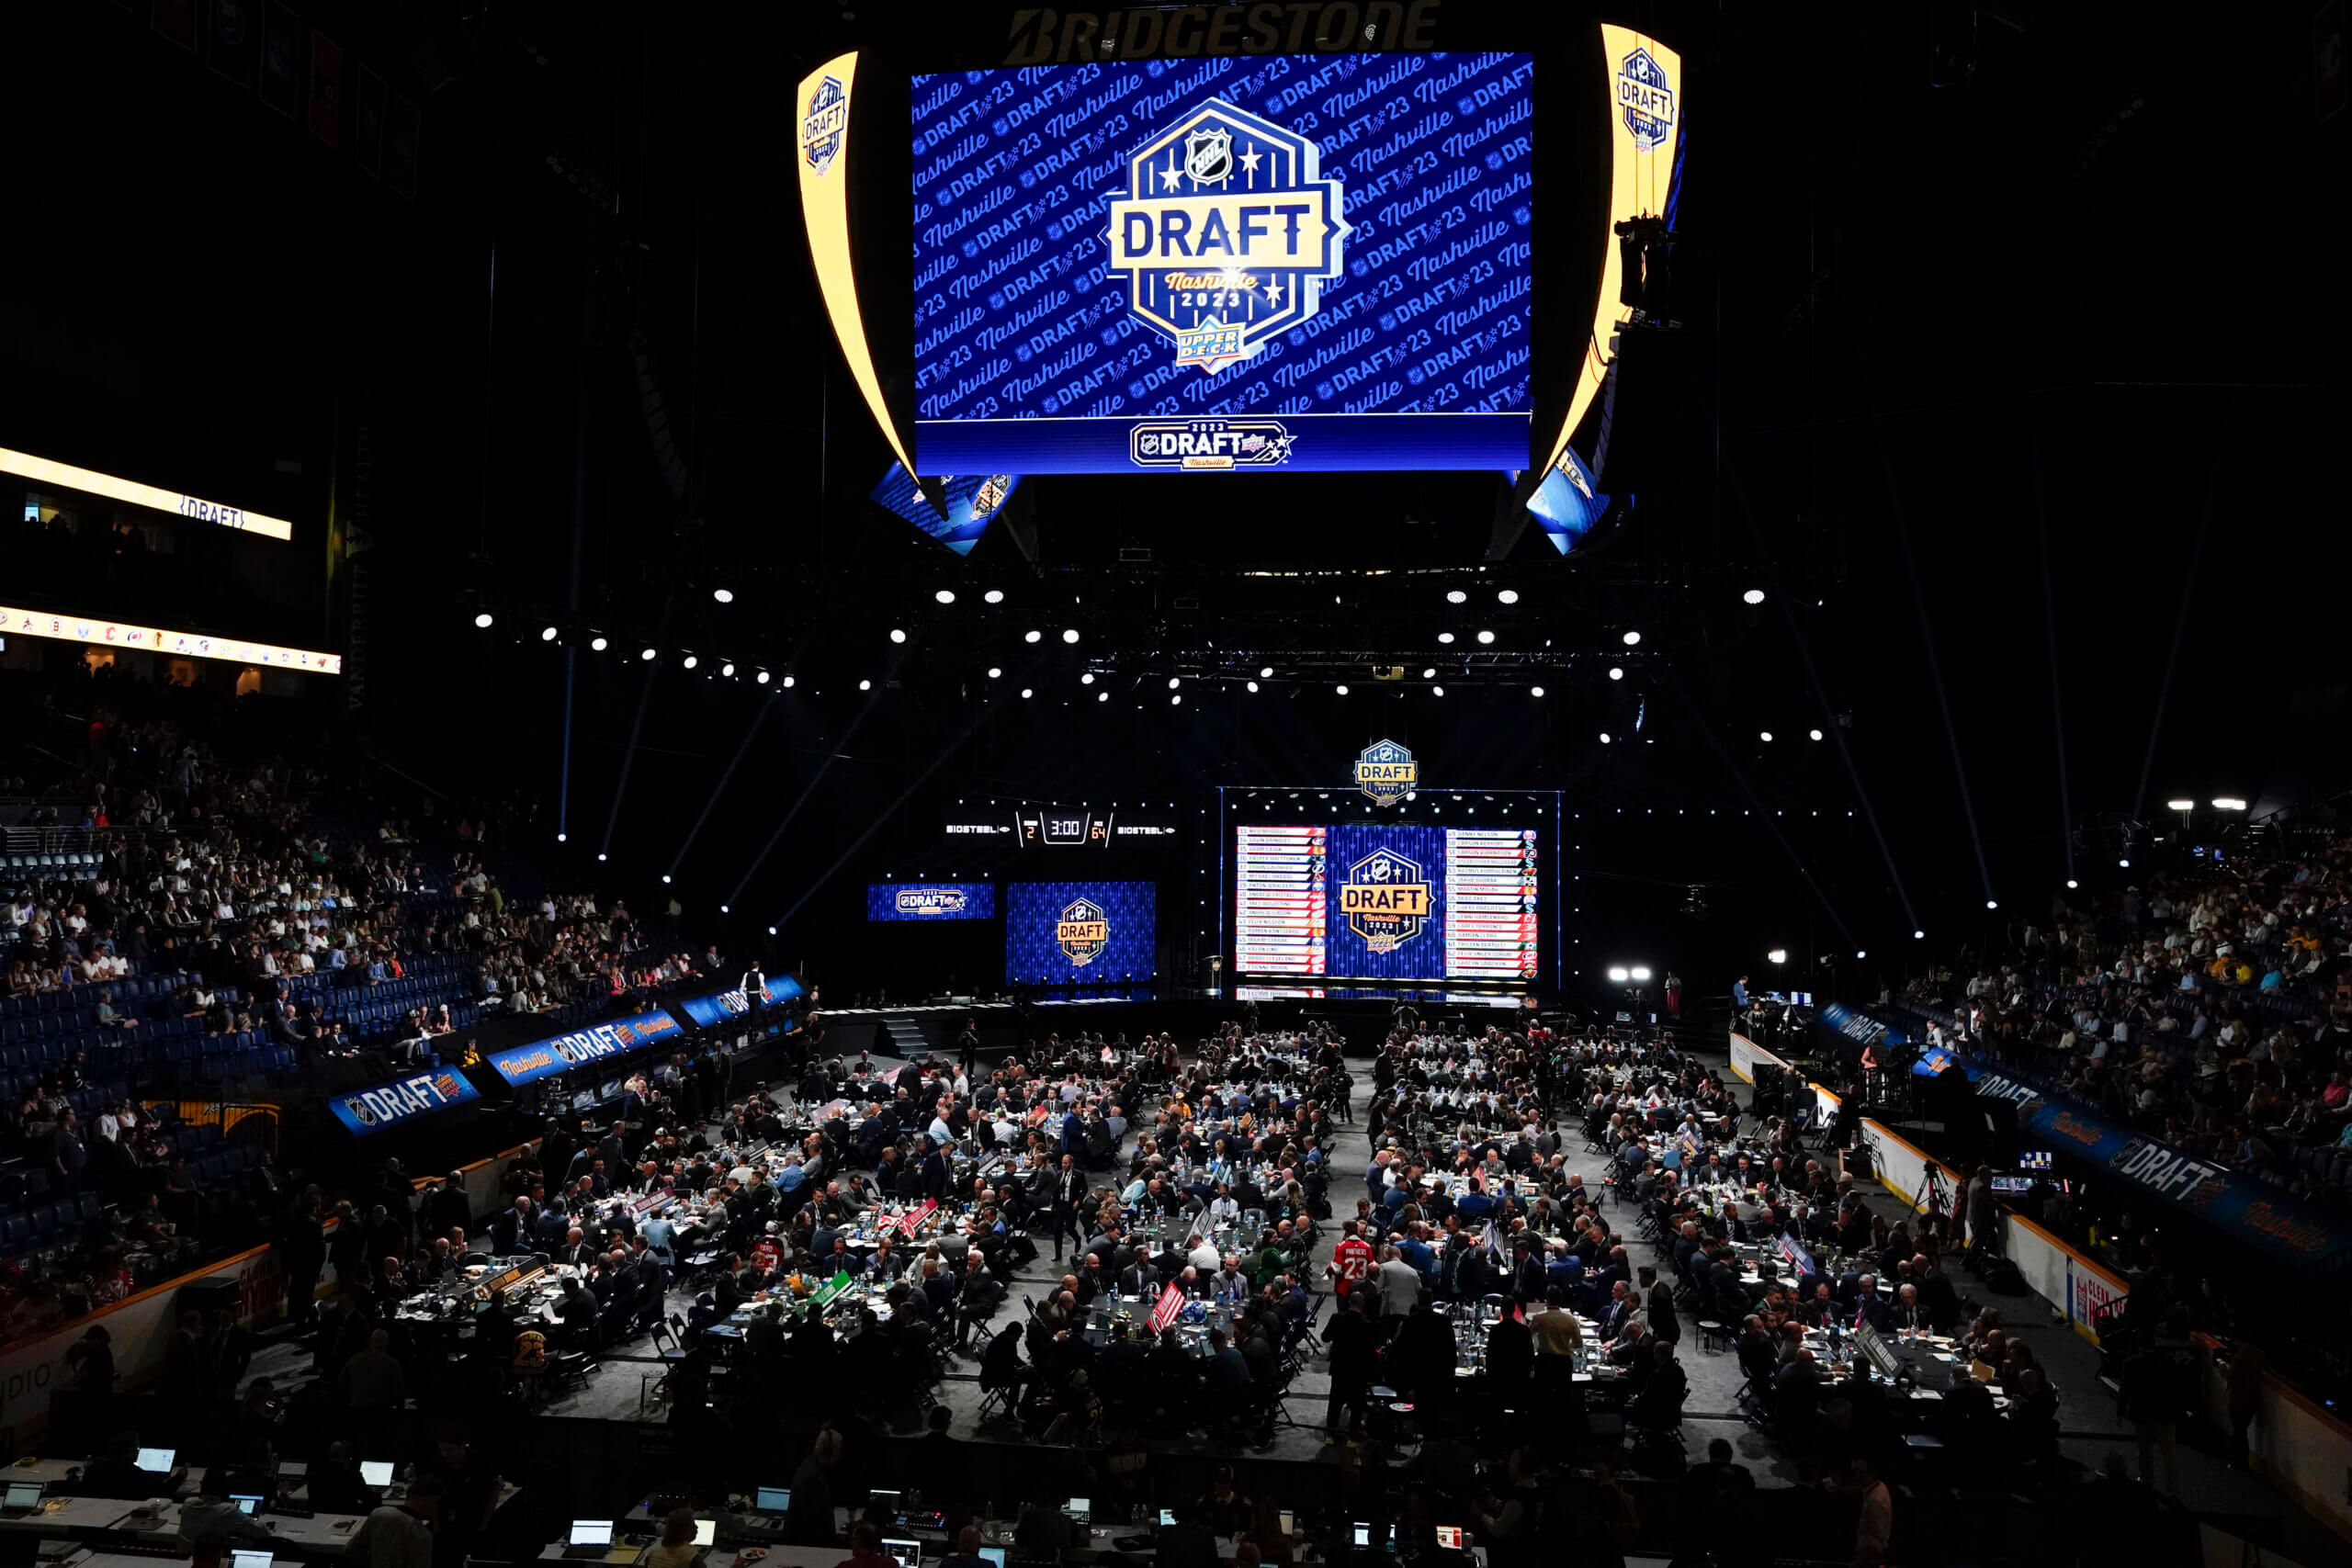 Four London Knights selected in 2023 NHL Entry Draft - London